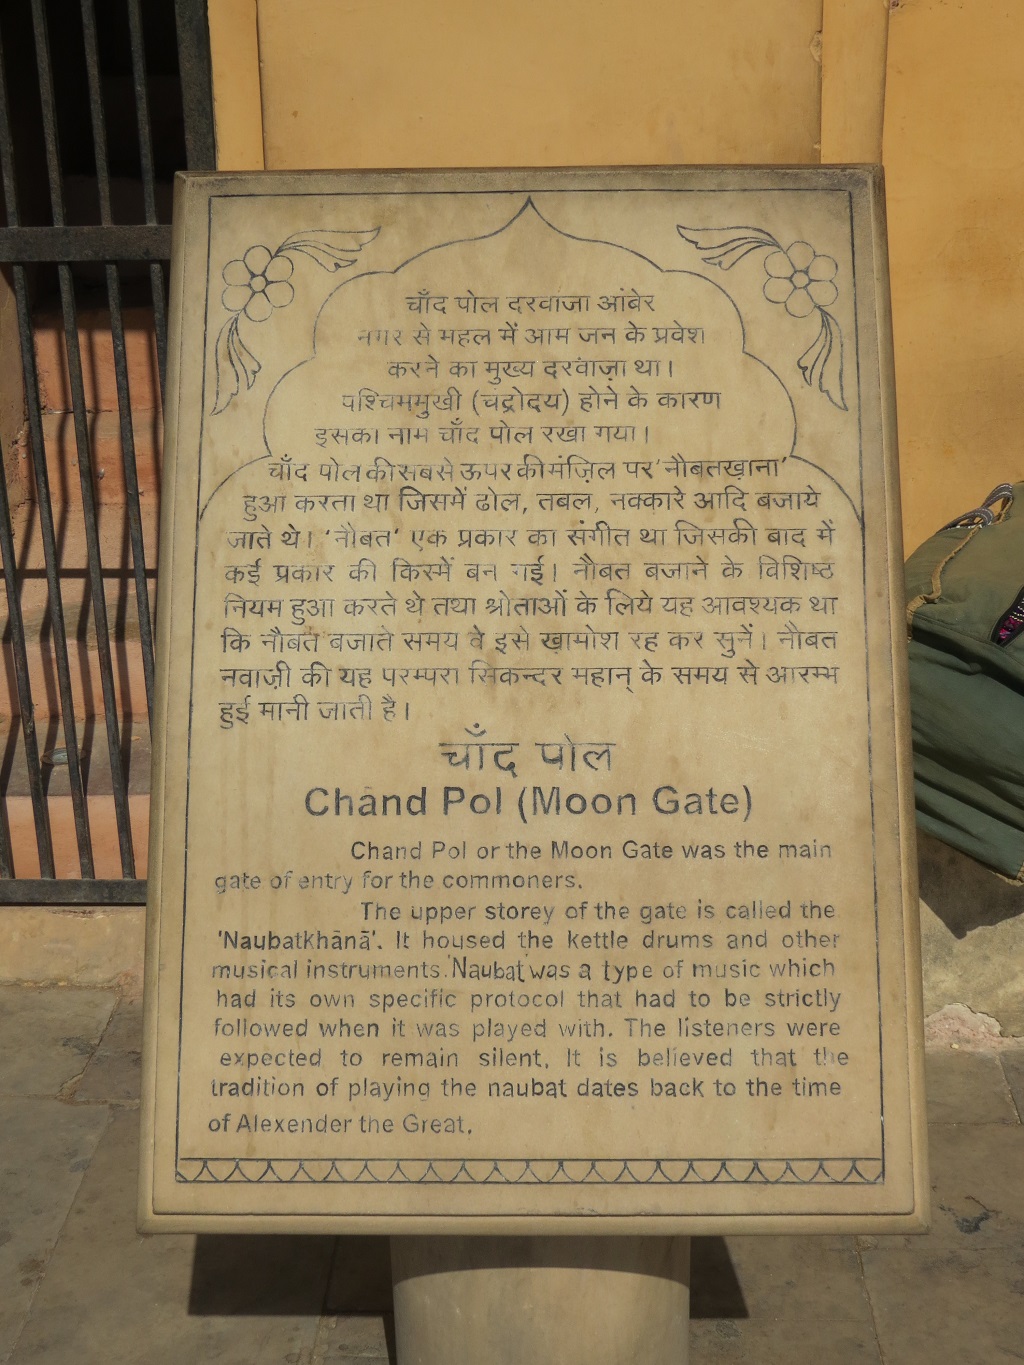 About: Chand Pol (Moon Gate)